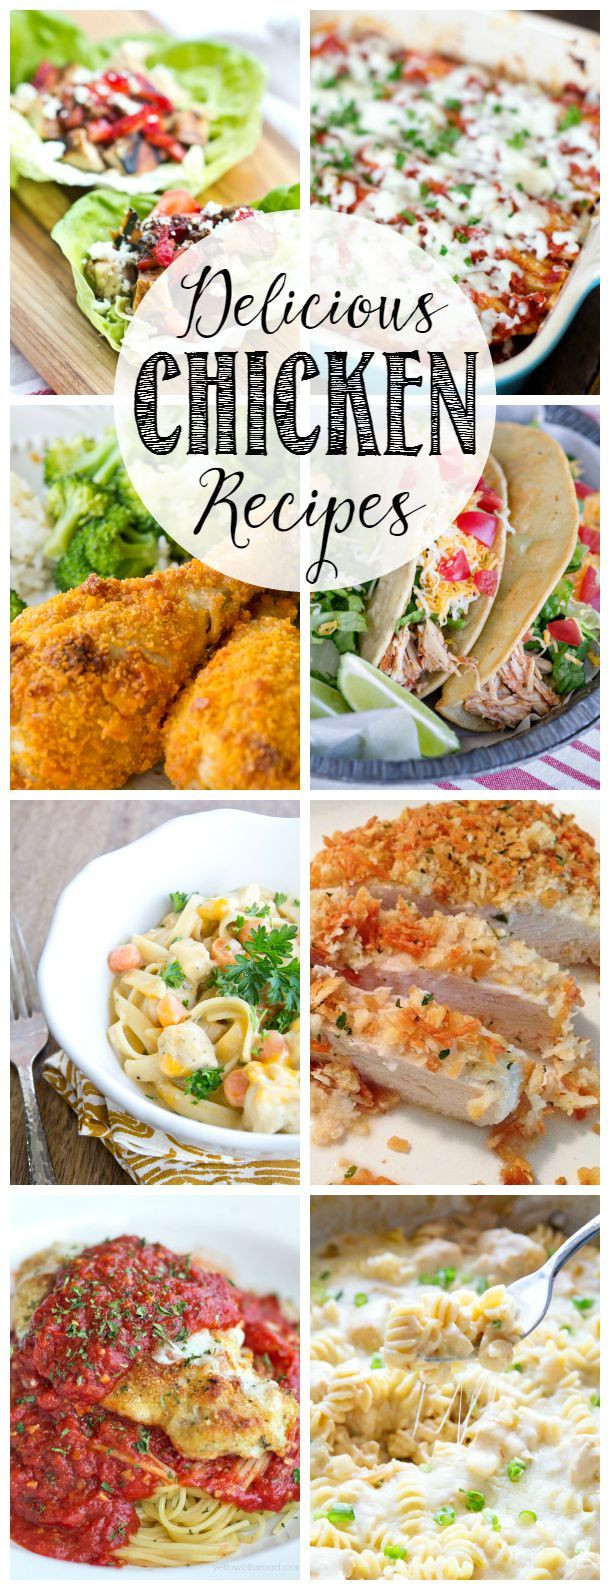 Delicious Healthy Dinner Recipes
 1000 images about Recipes Fast and Healthy on Pinterest